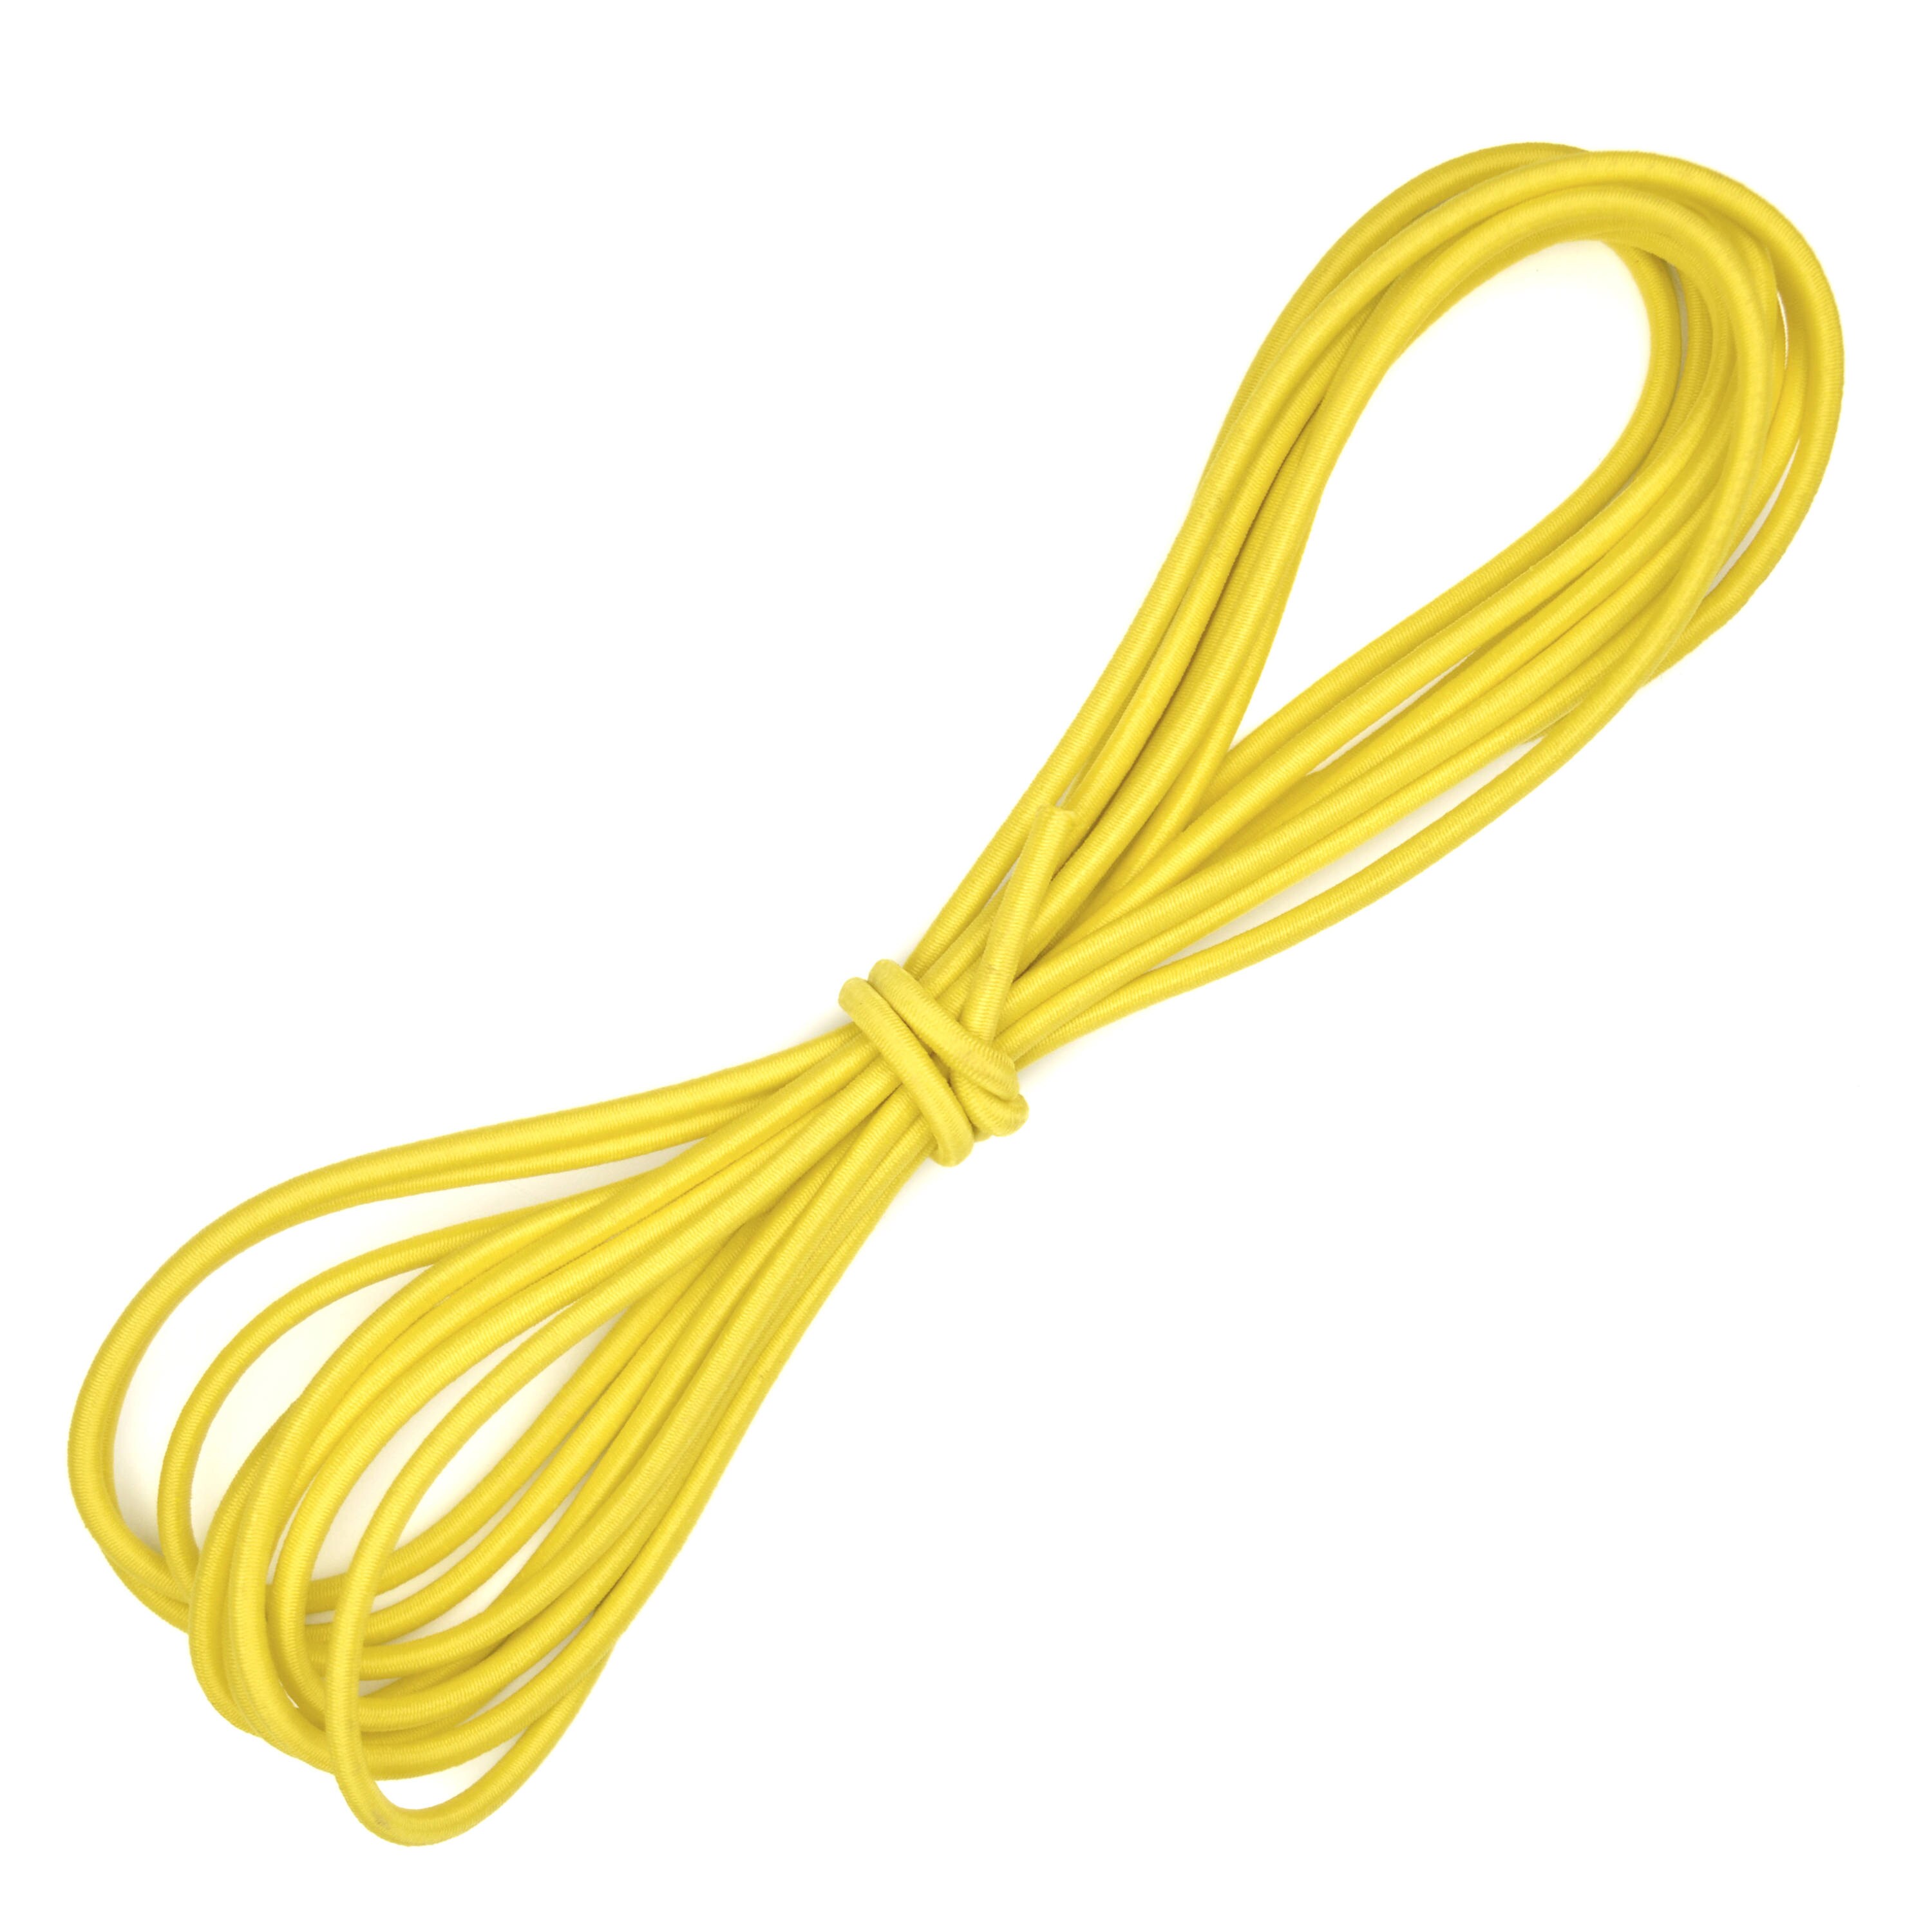 100ft 1/4" Yellow Bungee Cord Marine Grade Heavy Duty Shock Rope Tie Stretch 